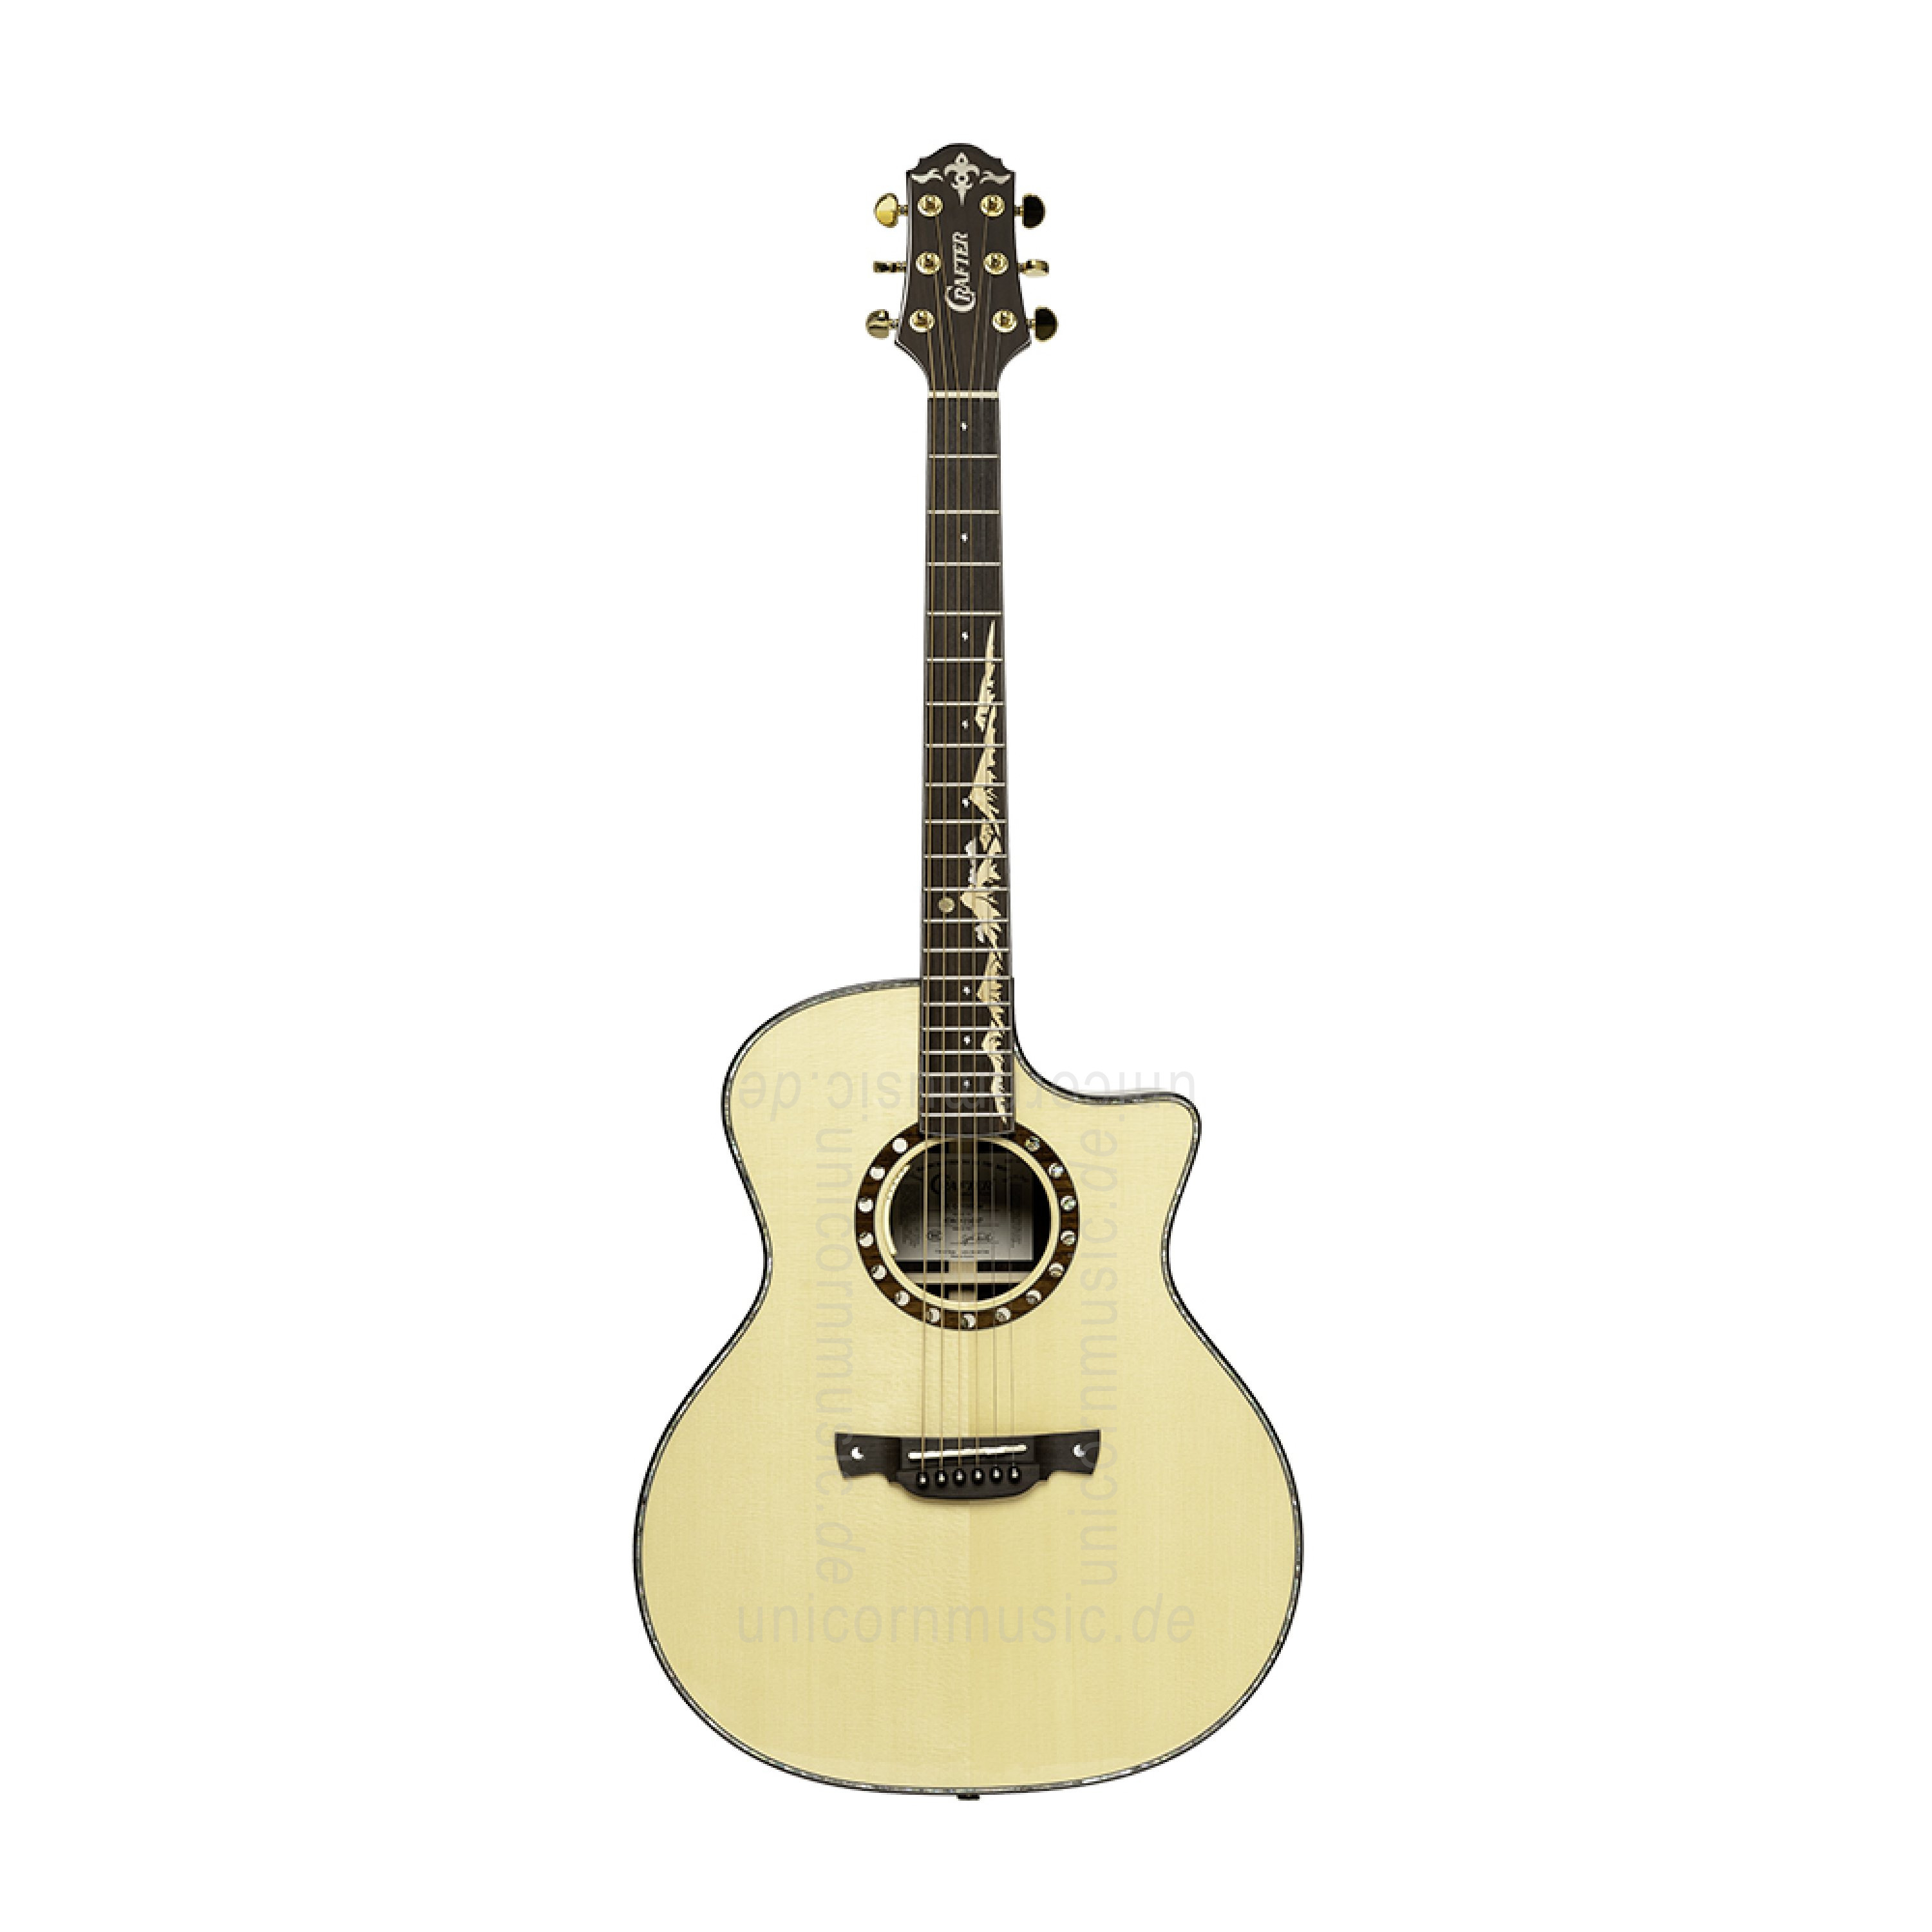 to article description / price Acoustic Guitar - CRAFTER G-1000ce - Moon Landscape - Grand Auditorium - solid spruce top